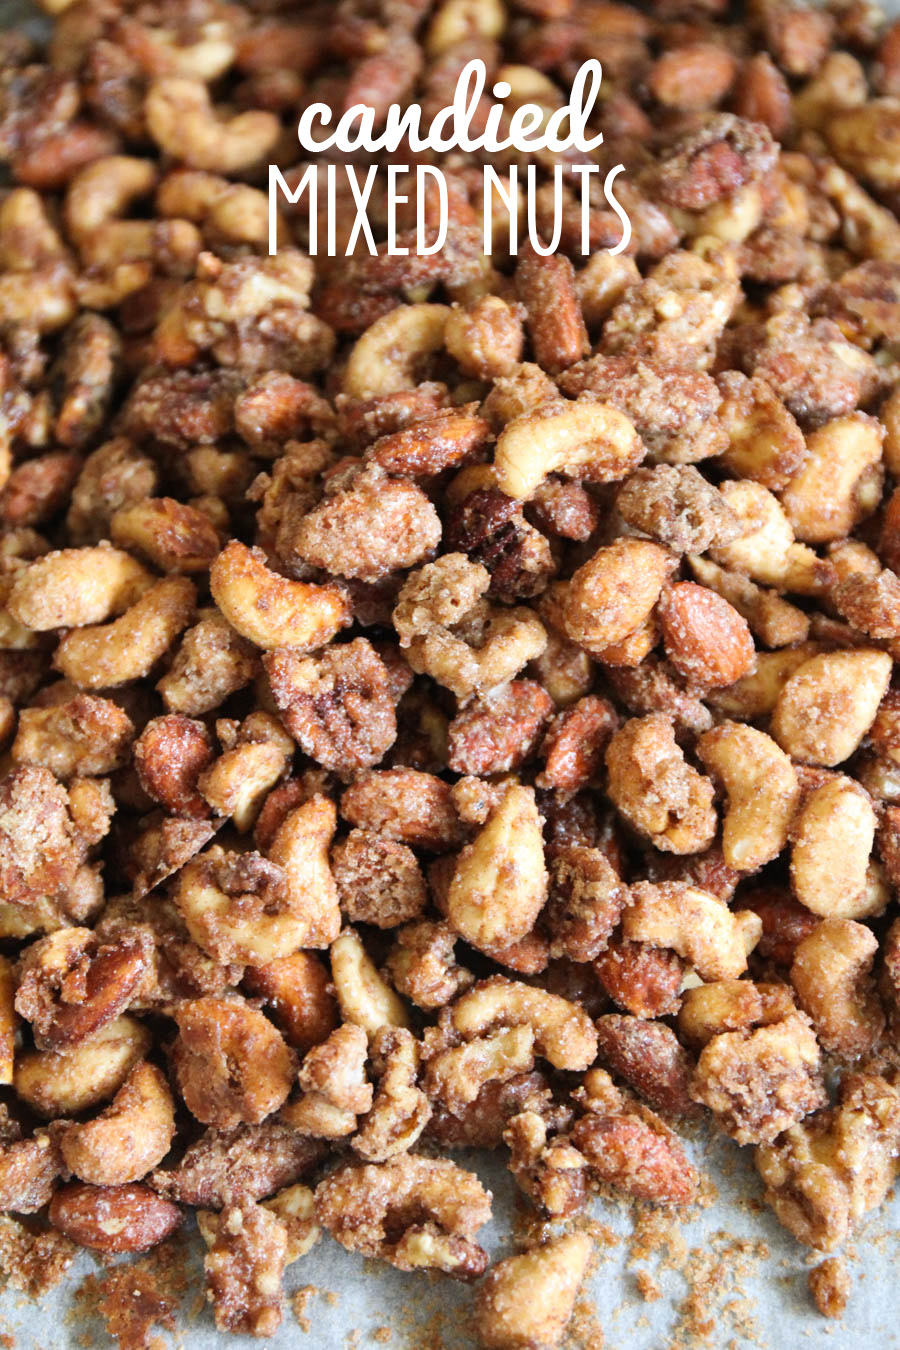 These candied mixed nuts are totally addicting and insanely delicious! They have the perfect blend of flavors and are so sweet and crisp!